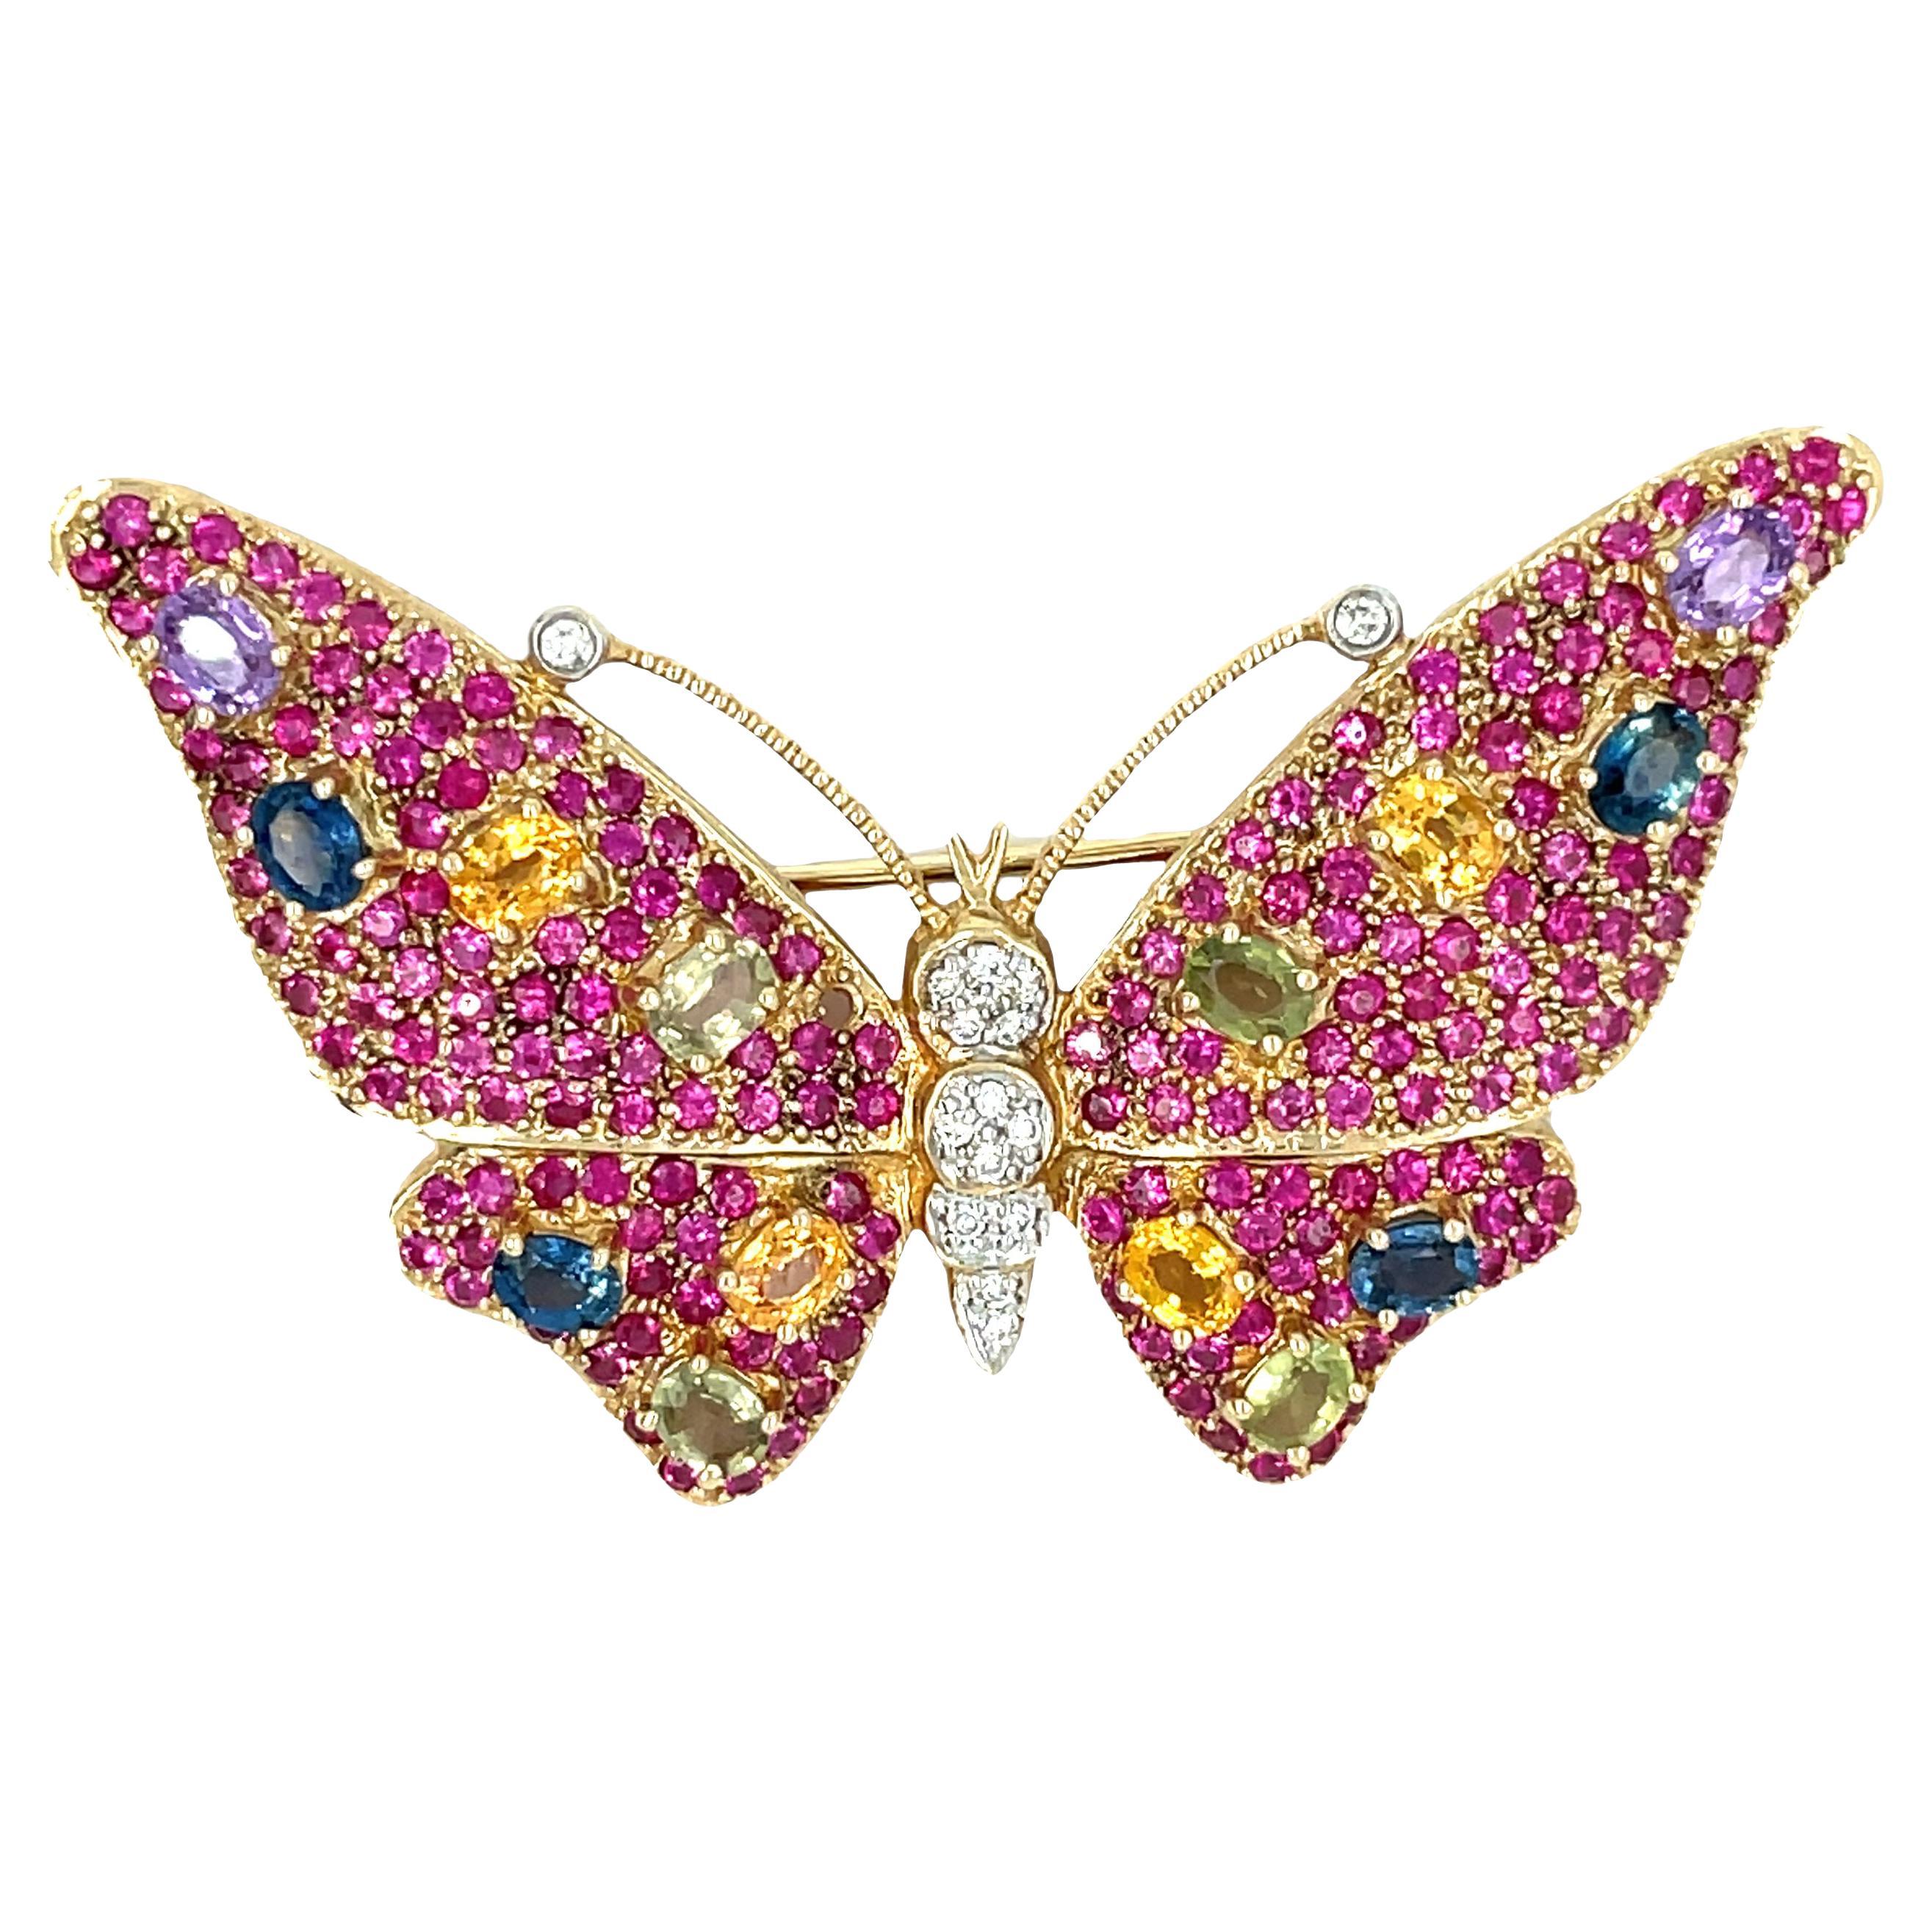 Experience vibrant beauty with this whimsical butterfly brooch adorned with a stunning array of rubies, multi-color sapphires, and dazzling diamonds. A true work of art, this brooch features superb gems totaling 5.5 carats, carefully set in polished